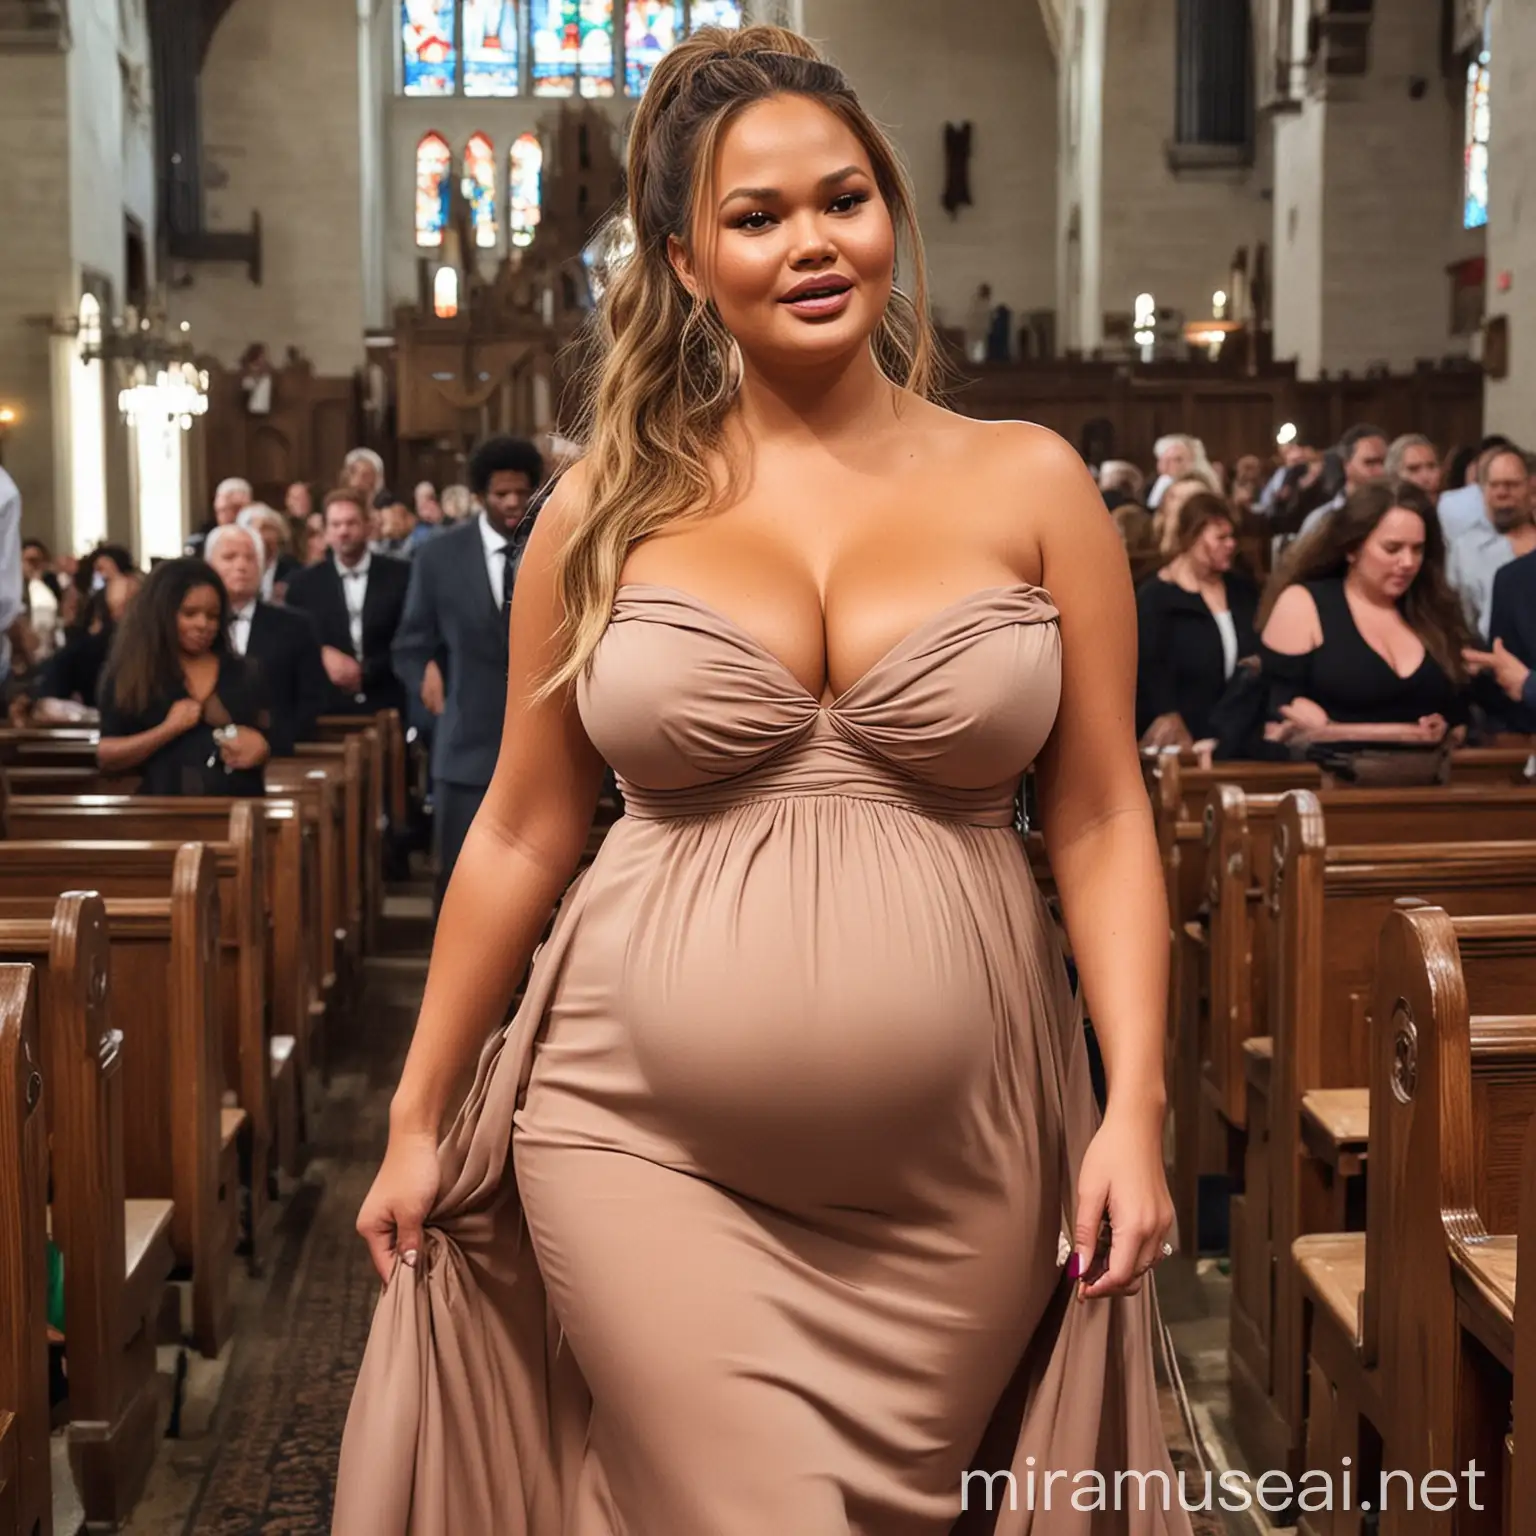 Chrissy Teigen Pregnant in Church Busty BBW with Long Hair and Strapless Dress